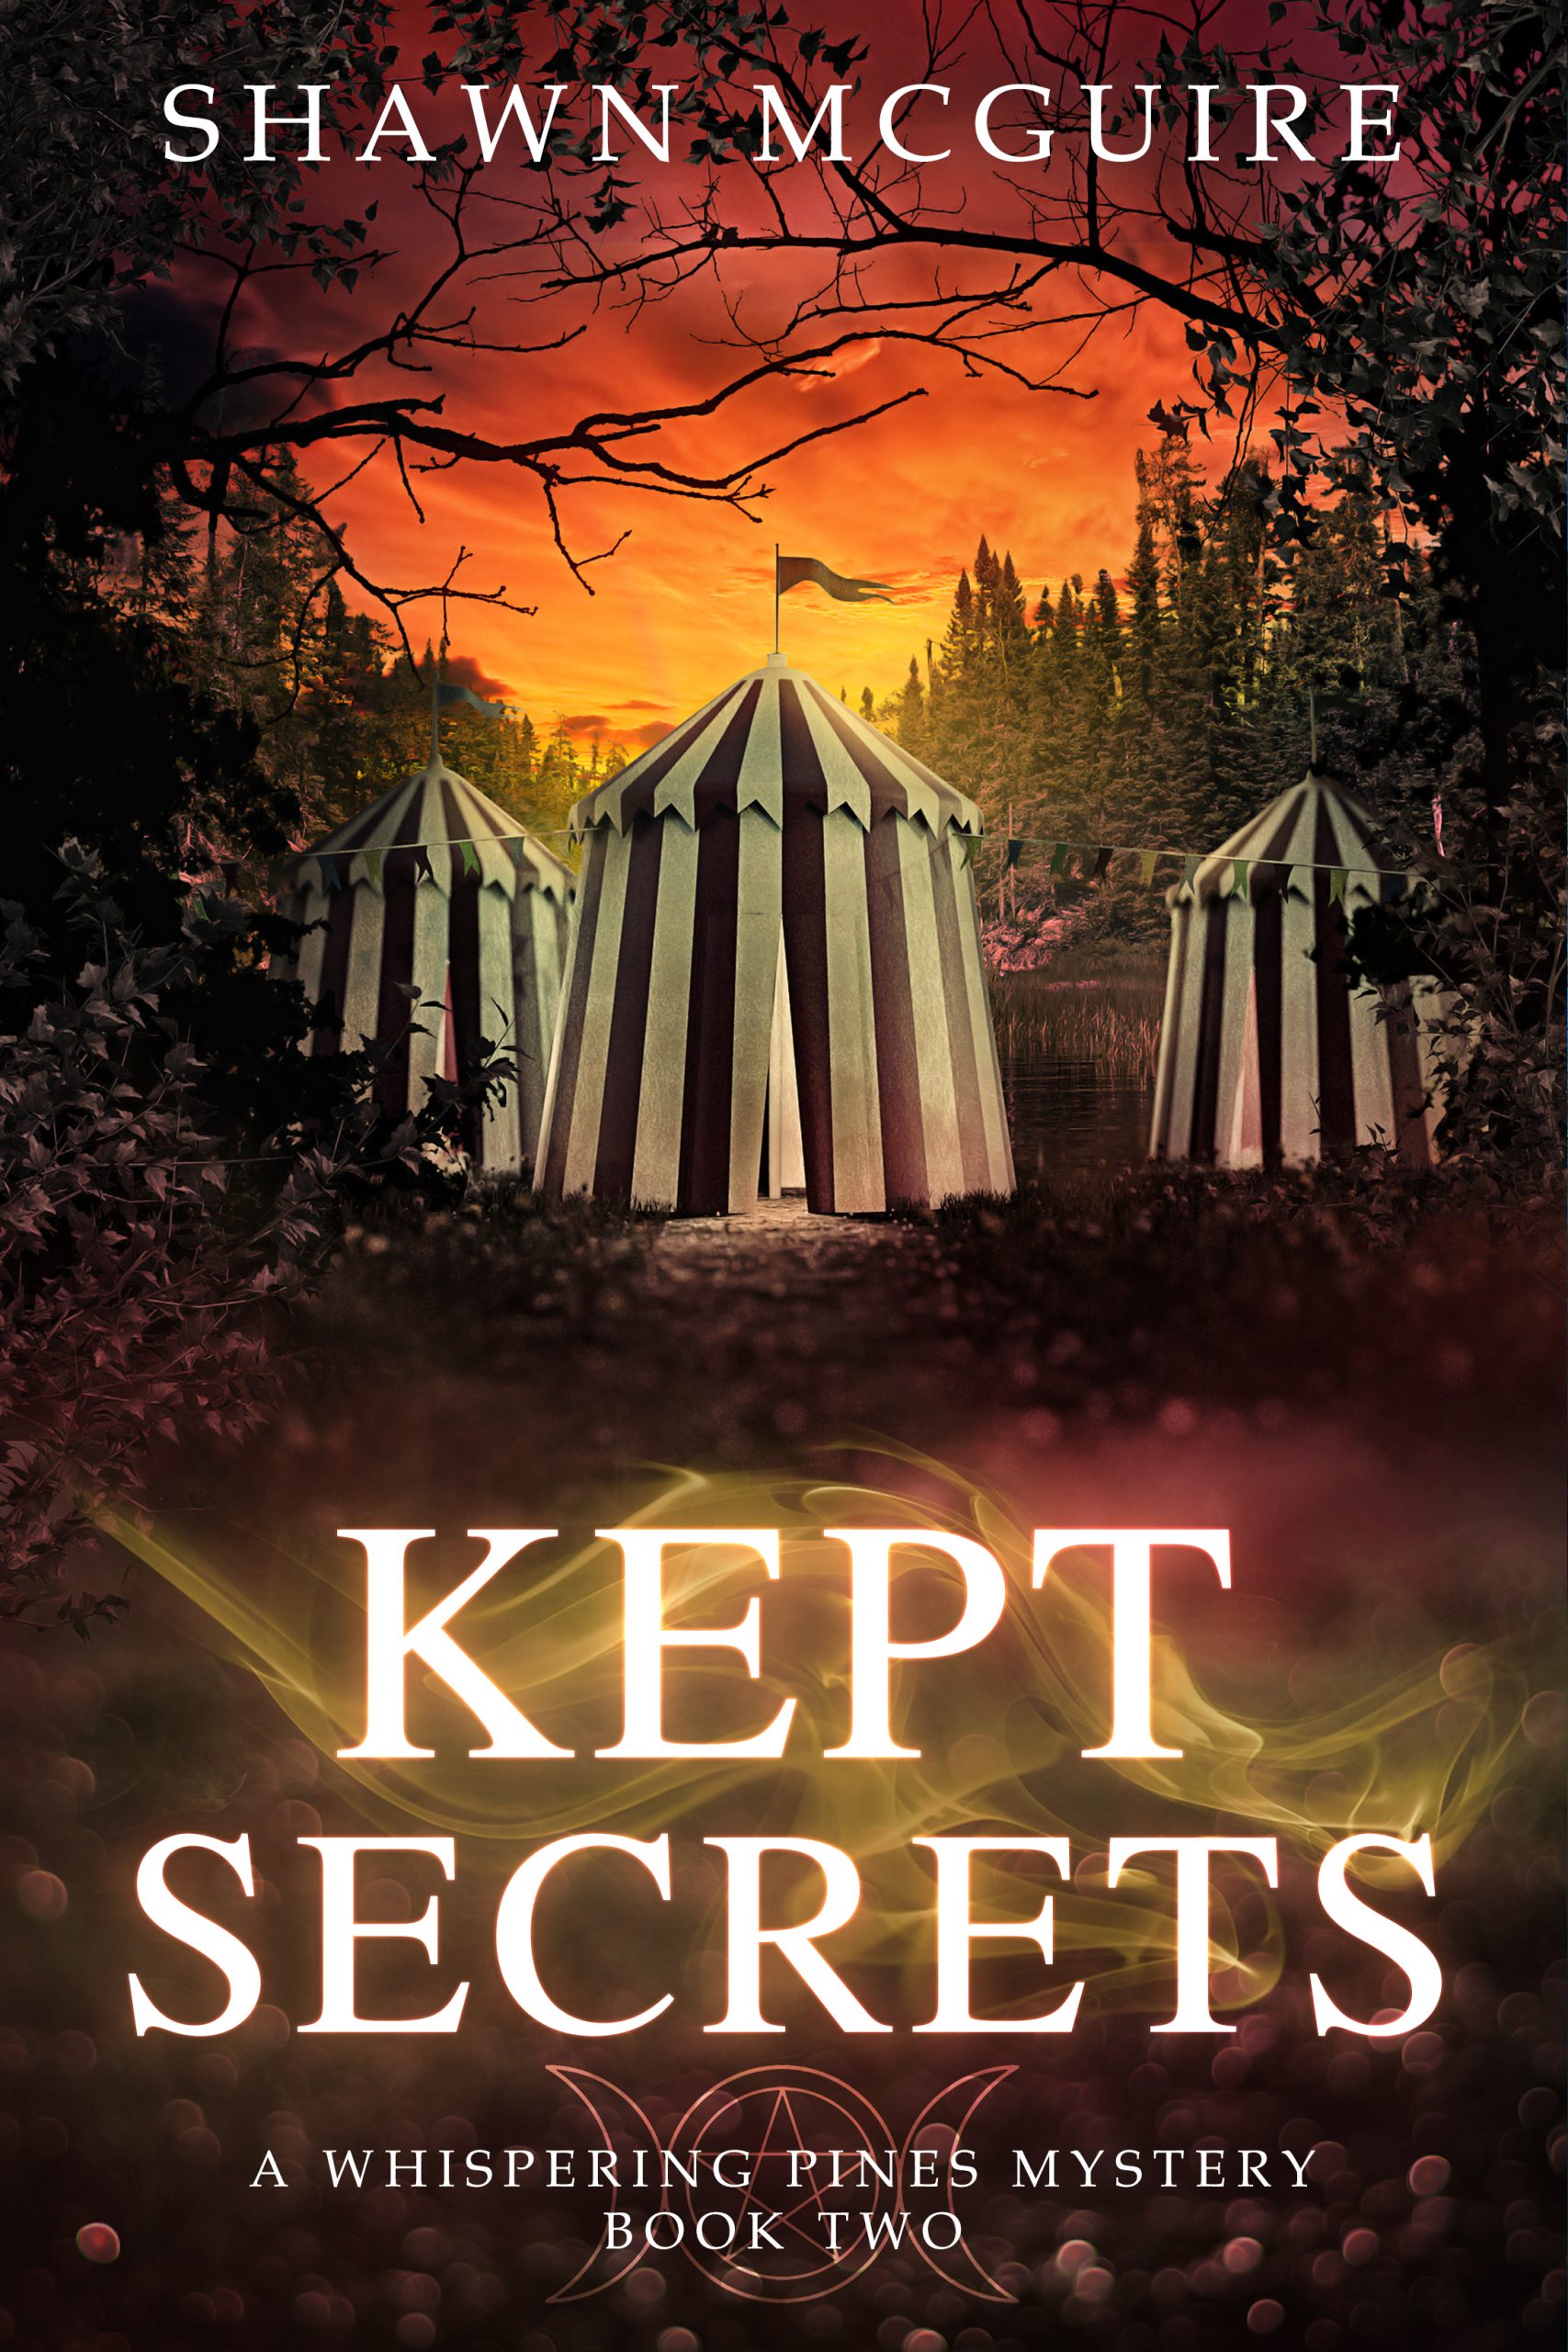 Family Secrets: A Whispering Pines Mystery  